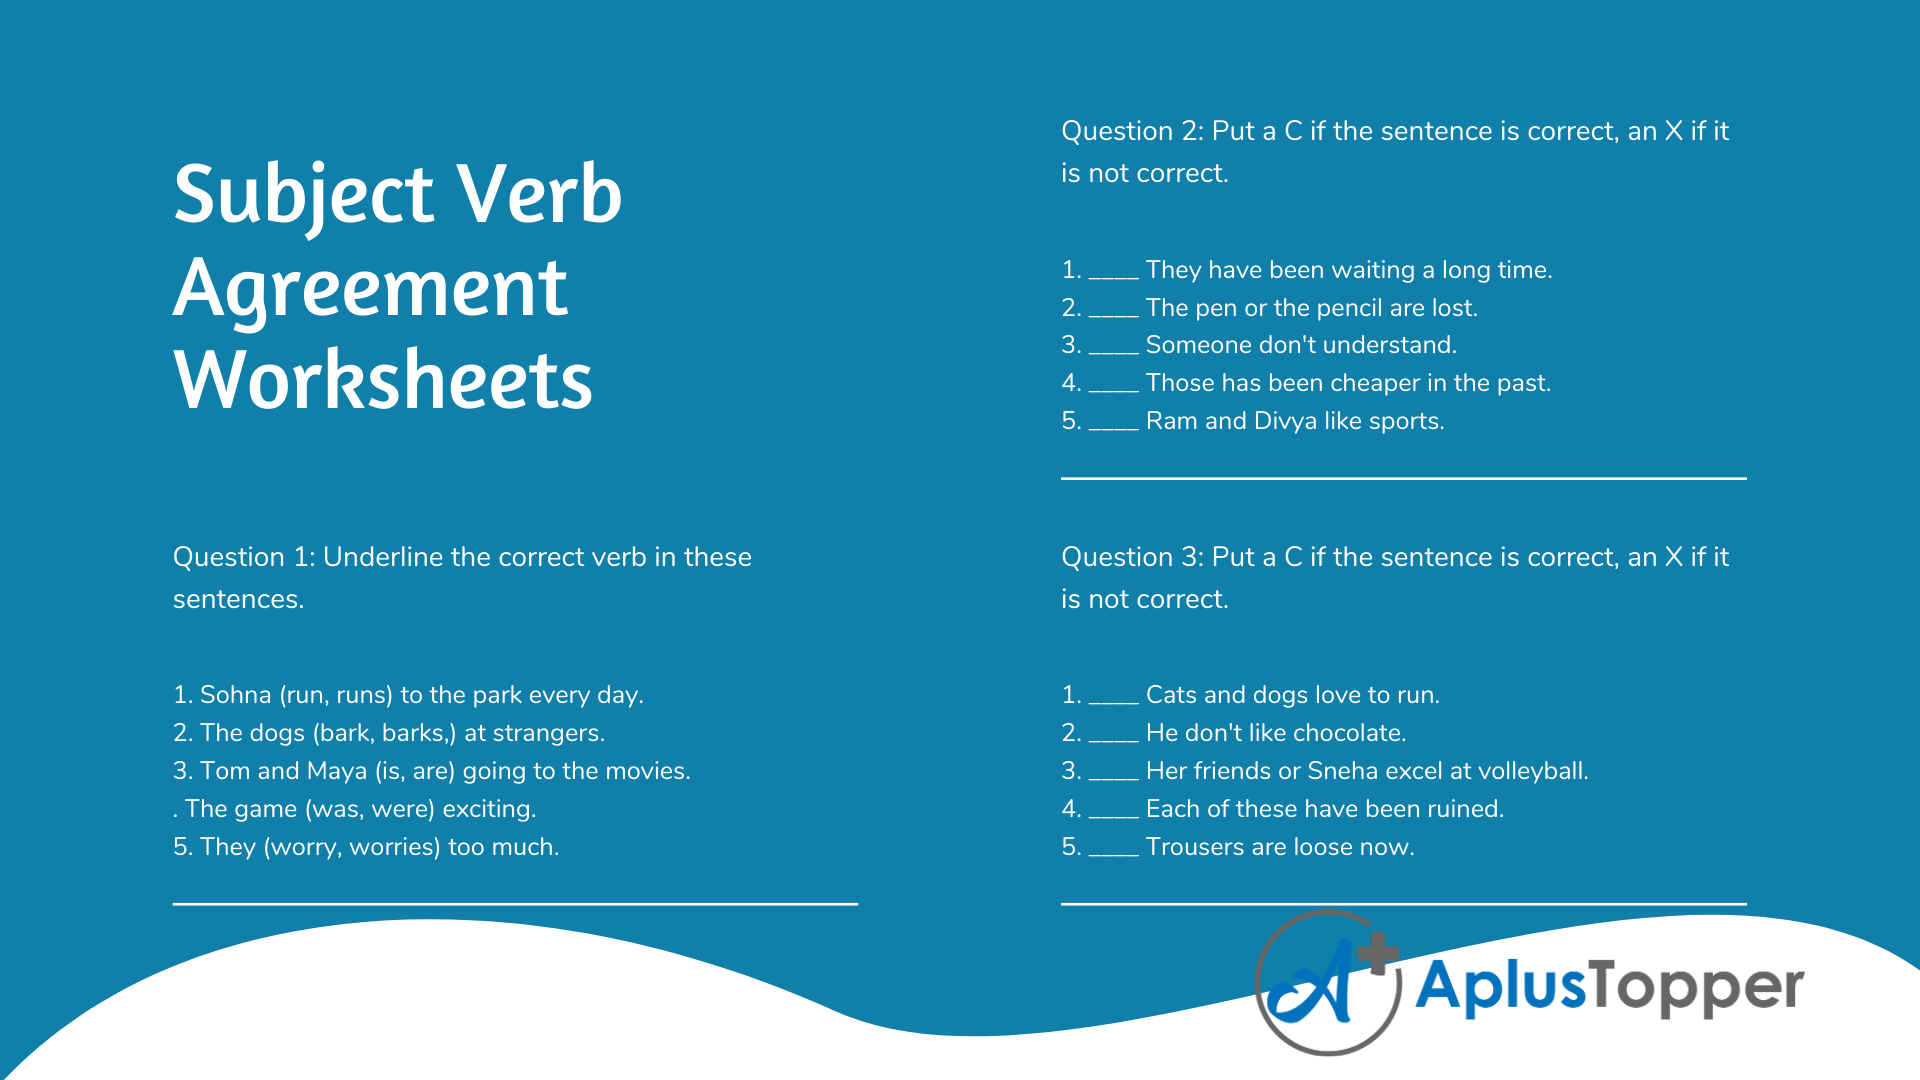 Subject verb Agreement Worksheet. Subject verb Agreement. Subject verb Agreement exercises. Subject and verb Agreement Worksheets Grade 2. Underline the correct verb 5